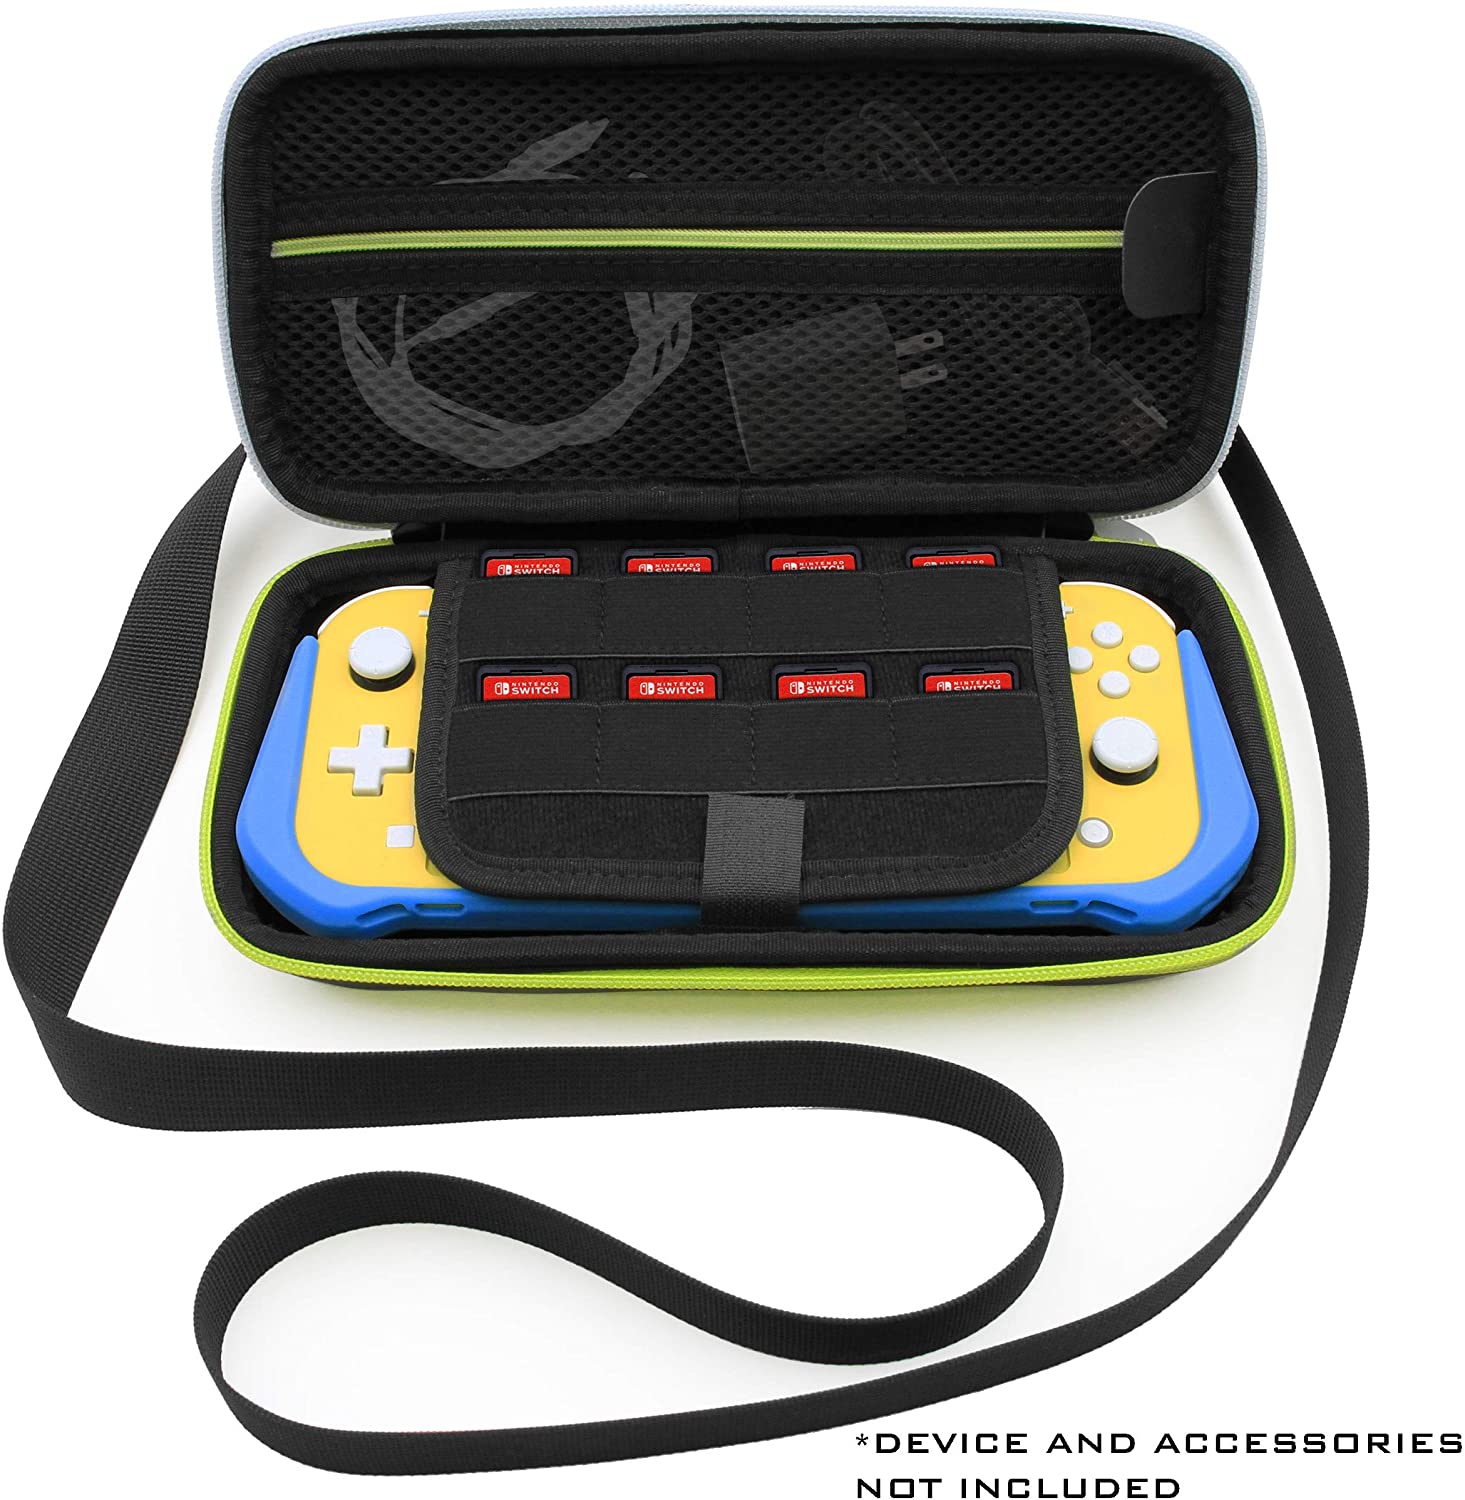 CASEMATIX Carrying Case for Nintendo Switch Lite with 8 Game Slots, Non-Scratch Divider for Screen Protection, Accessory Storage and Strap | Lightweight Affordable Hard Cases For Microphones, Guns,